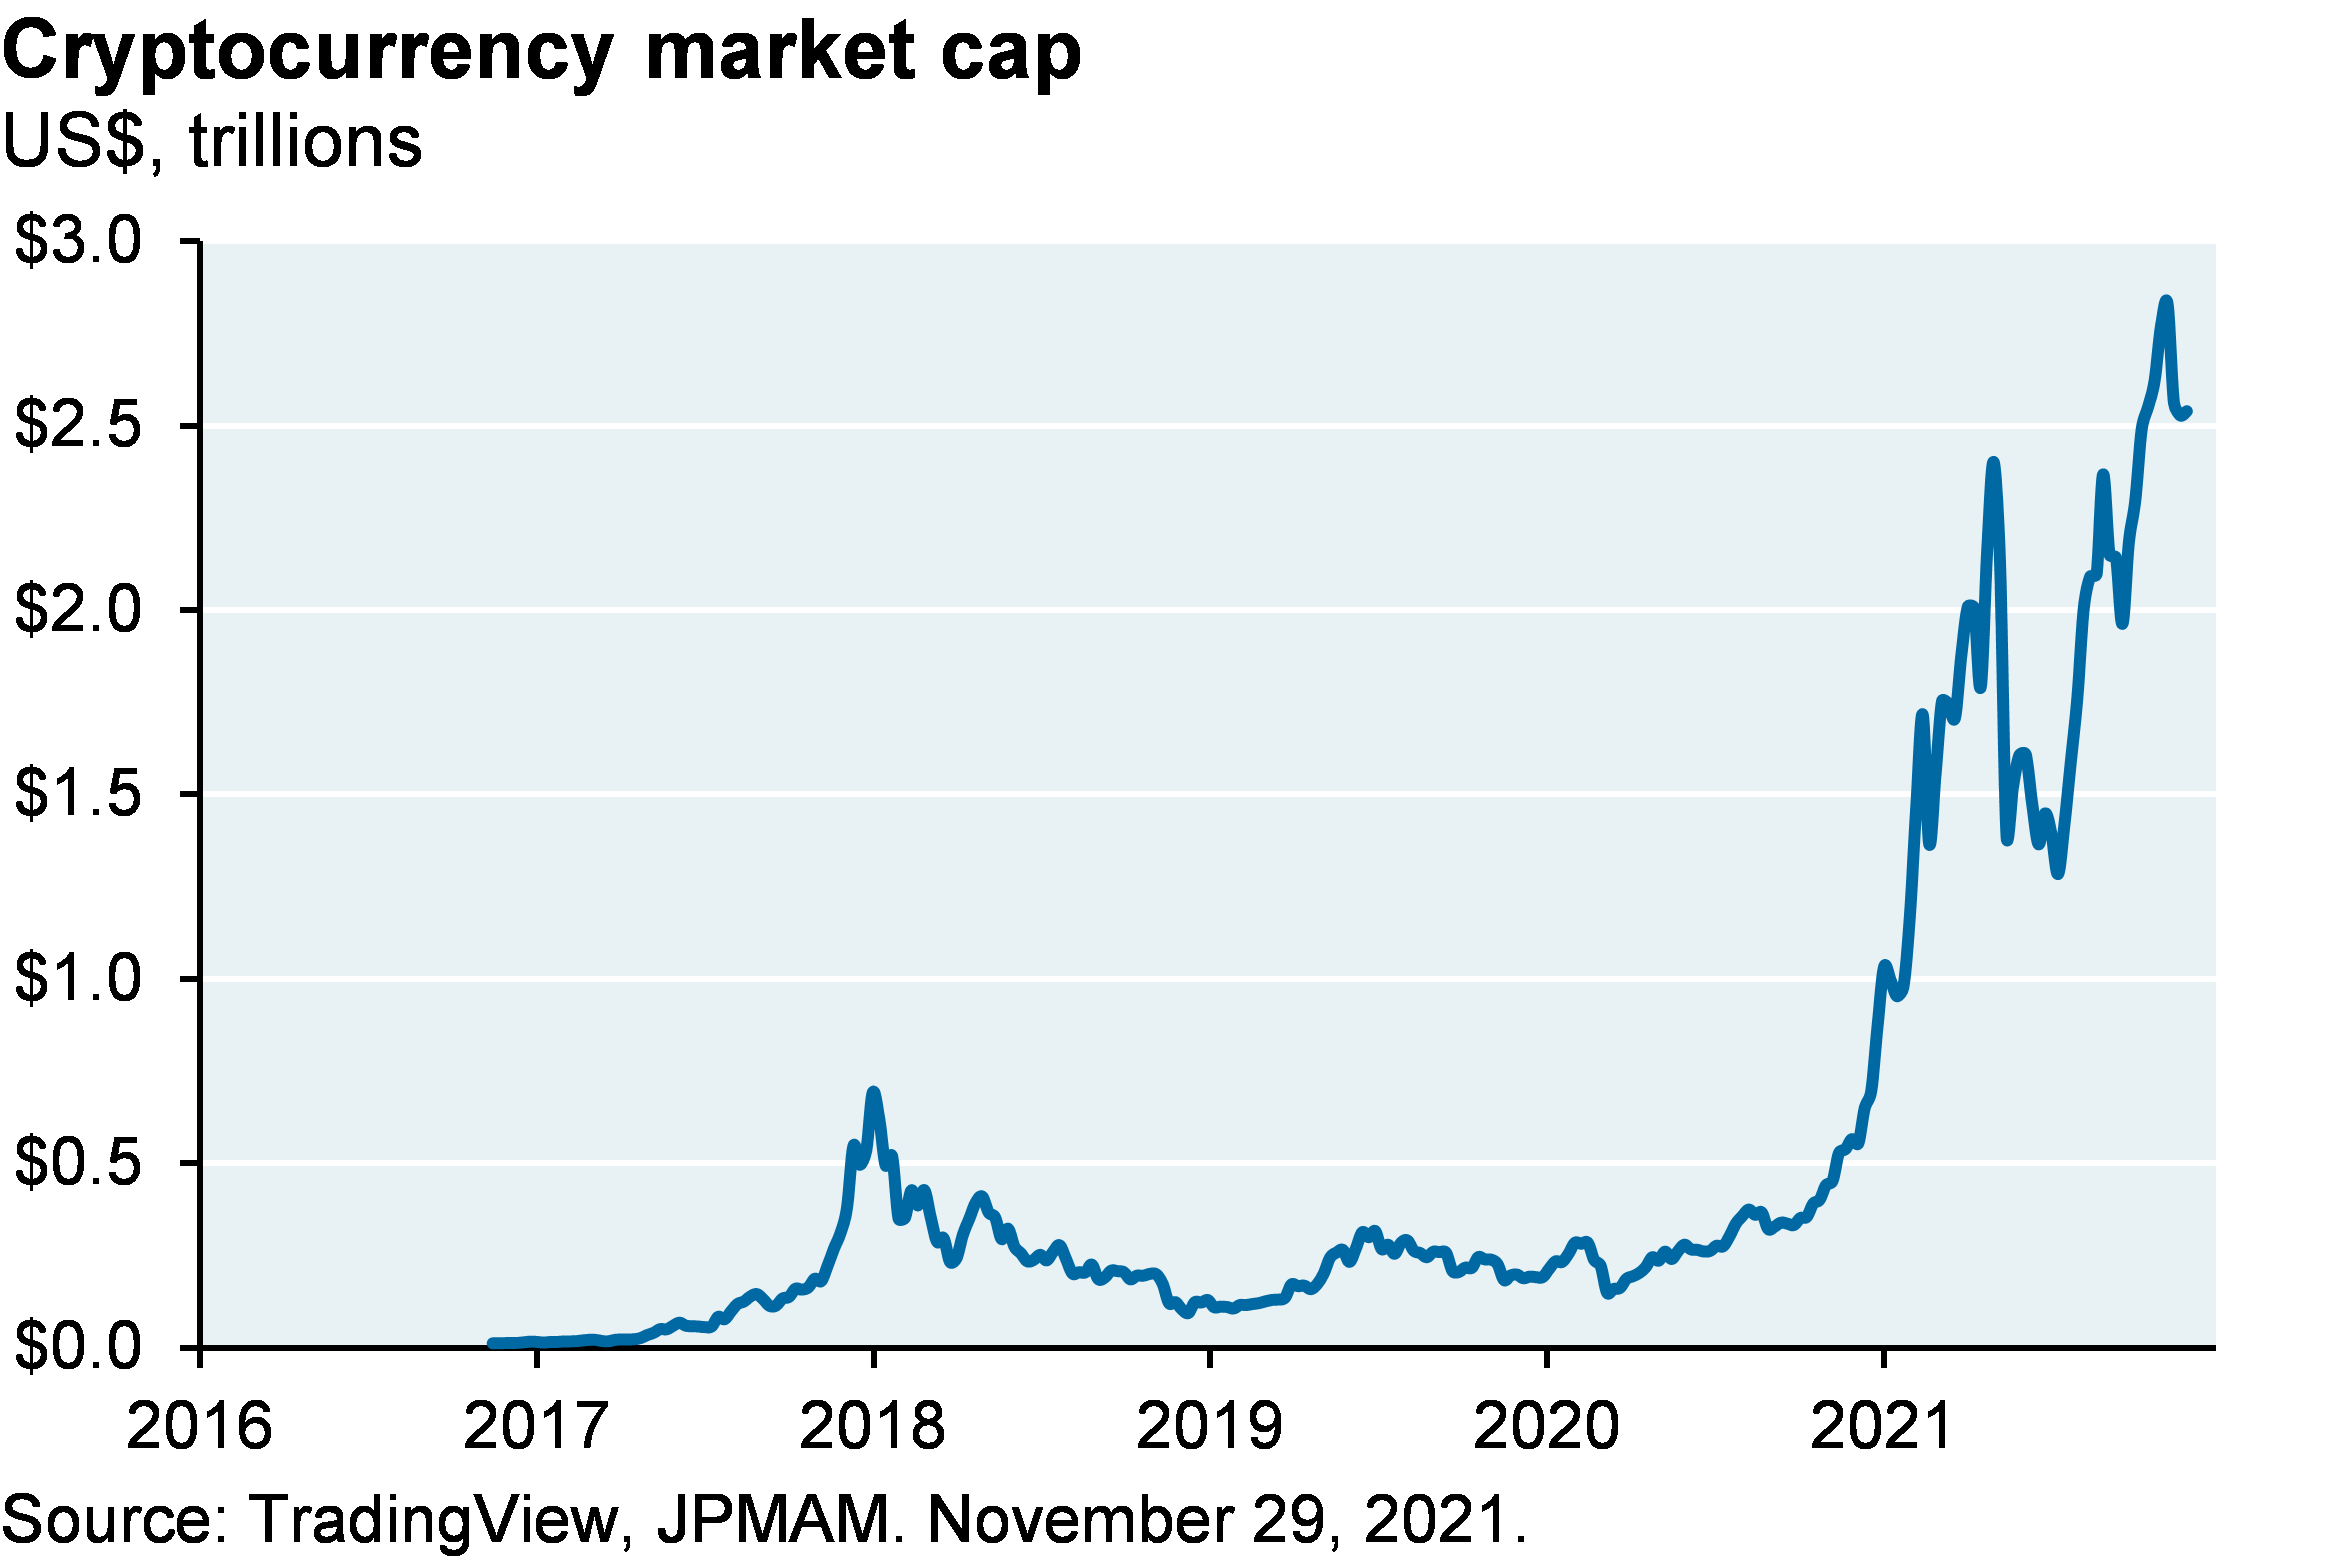 Line chart shows cryptocurrency market cap, shown in trillions of US dollars since 2016. Cryptocurrency market cap has increased from zero in 2016 to over $2.5 trillion as of November 2021.